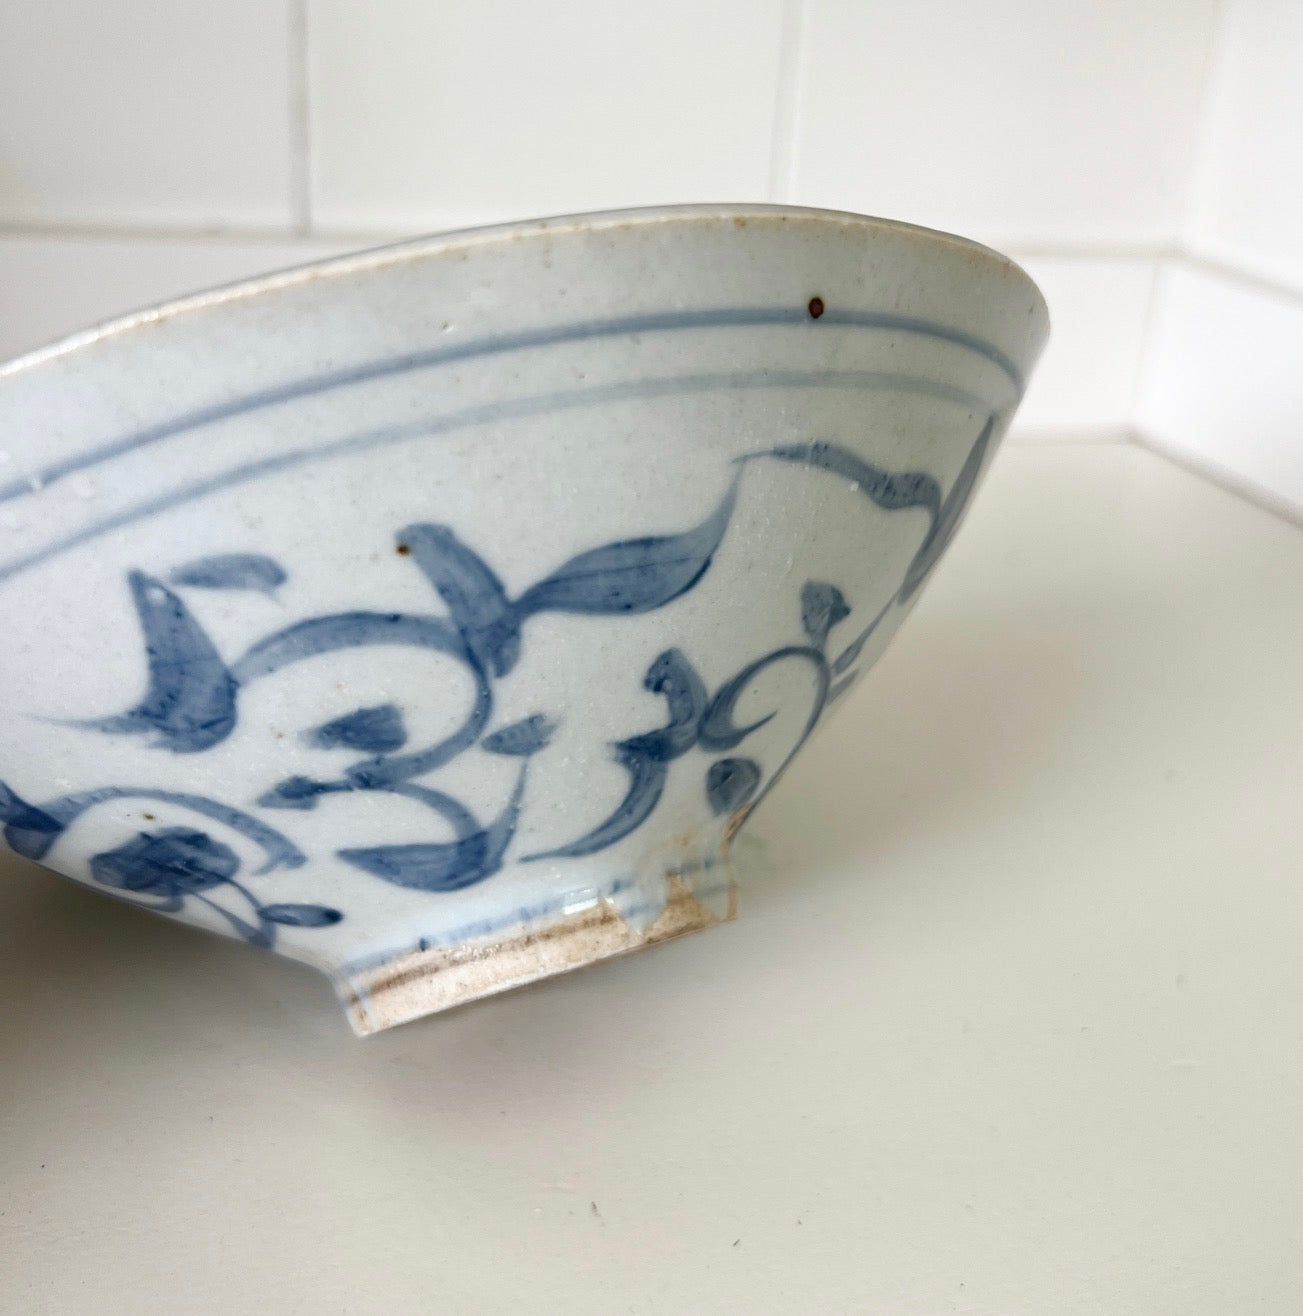  A bottom lower view of blue and white porcelain bowl